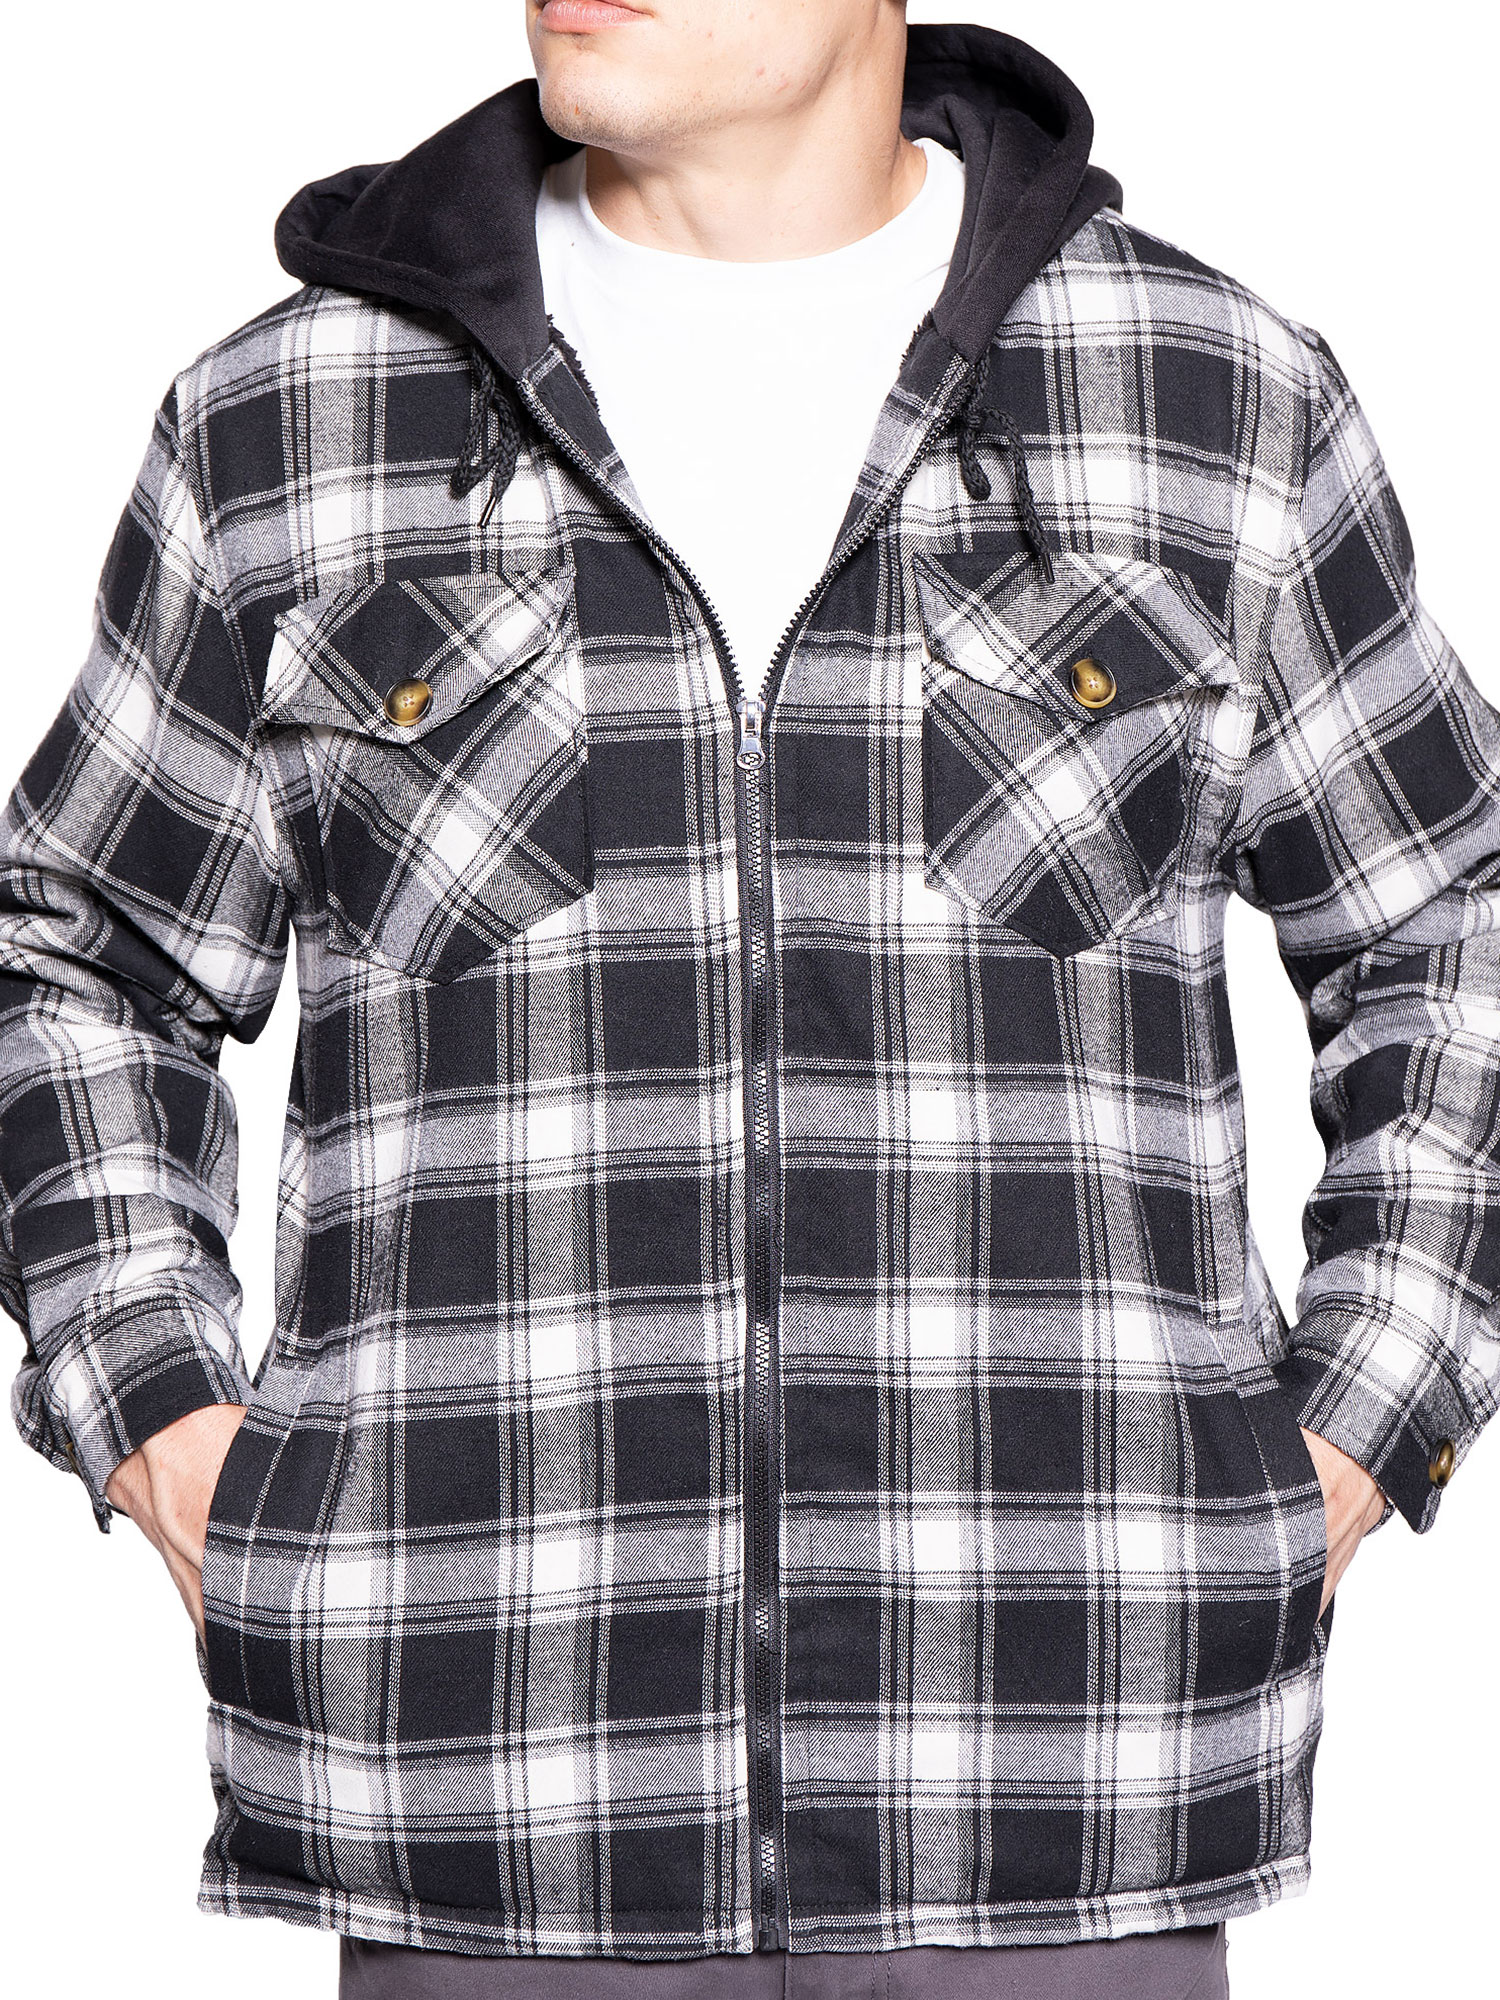 Visive Mens Heavy Sherpa Fleece-Lined Flannel Hooded Jacket - Big & Tall Sizes - Warm Zip Up Hoodie Jacket for Cold Weather - Perfect for Outdoor Activities - Durable & Fashion-Forward - image 5 of 6